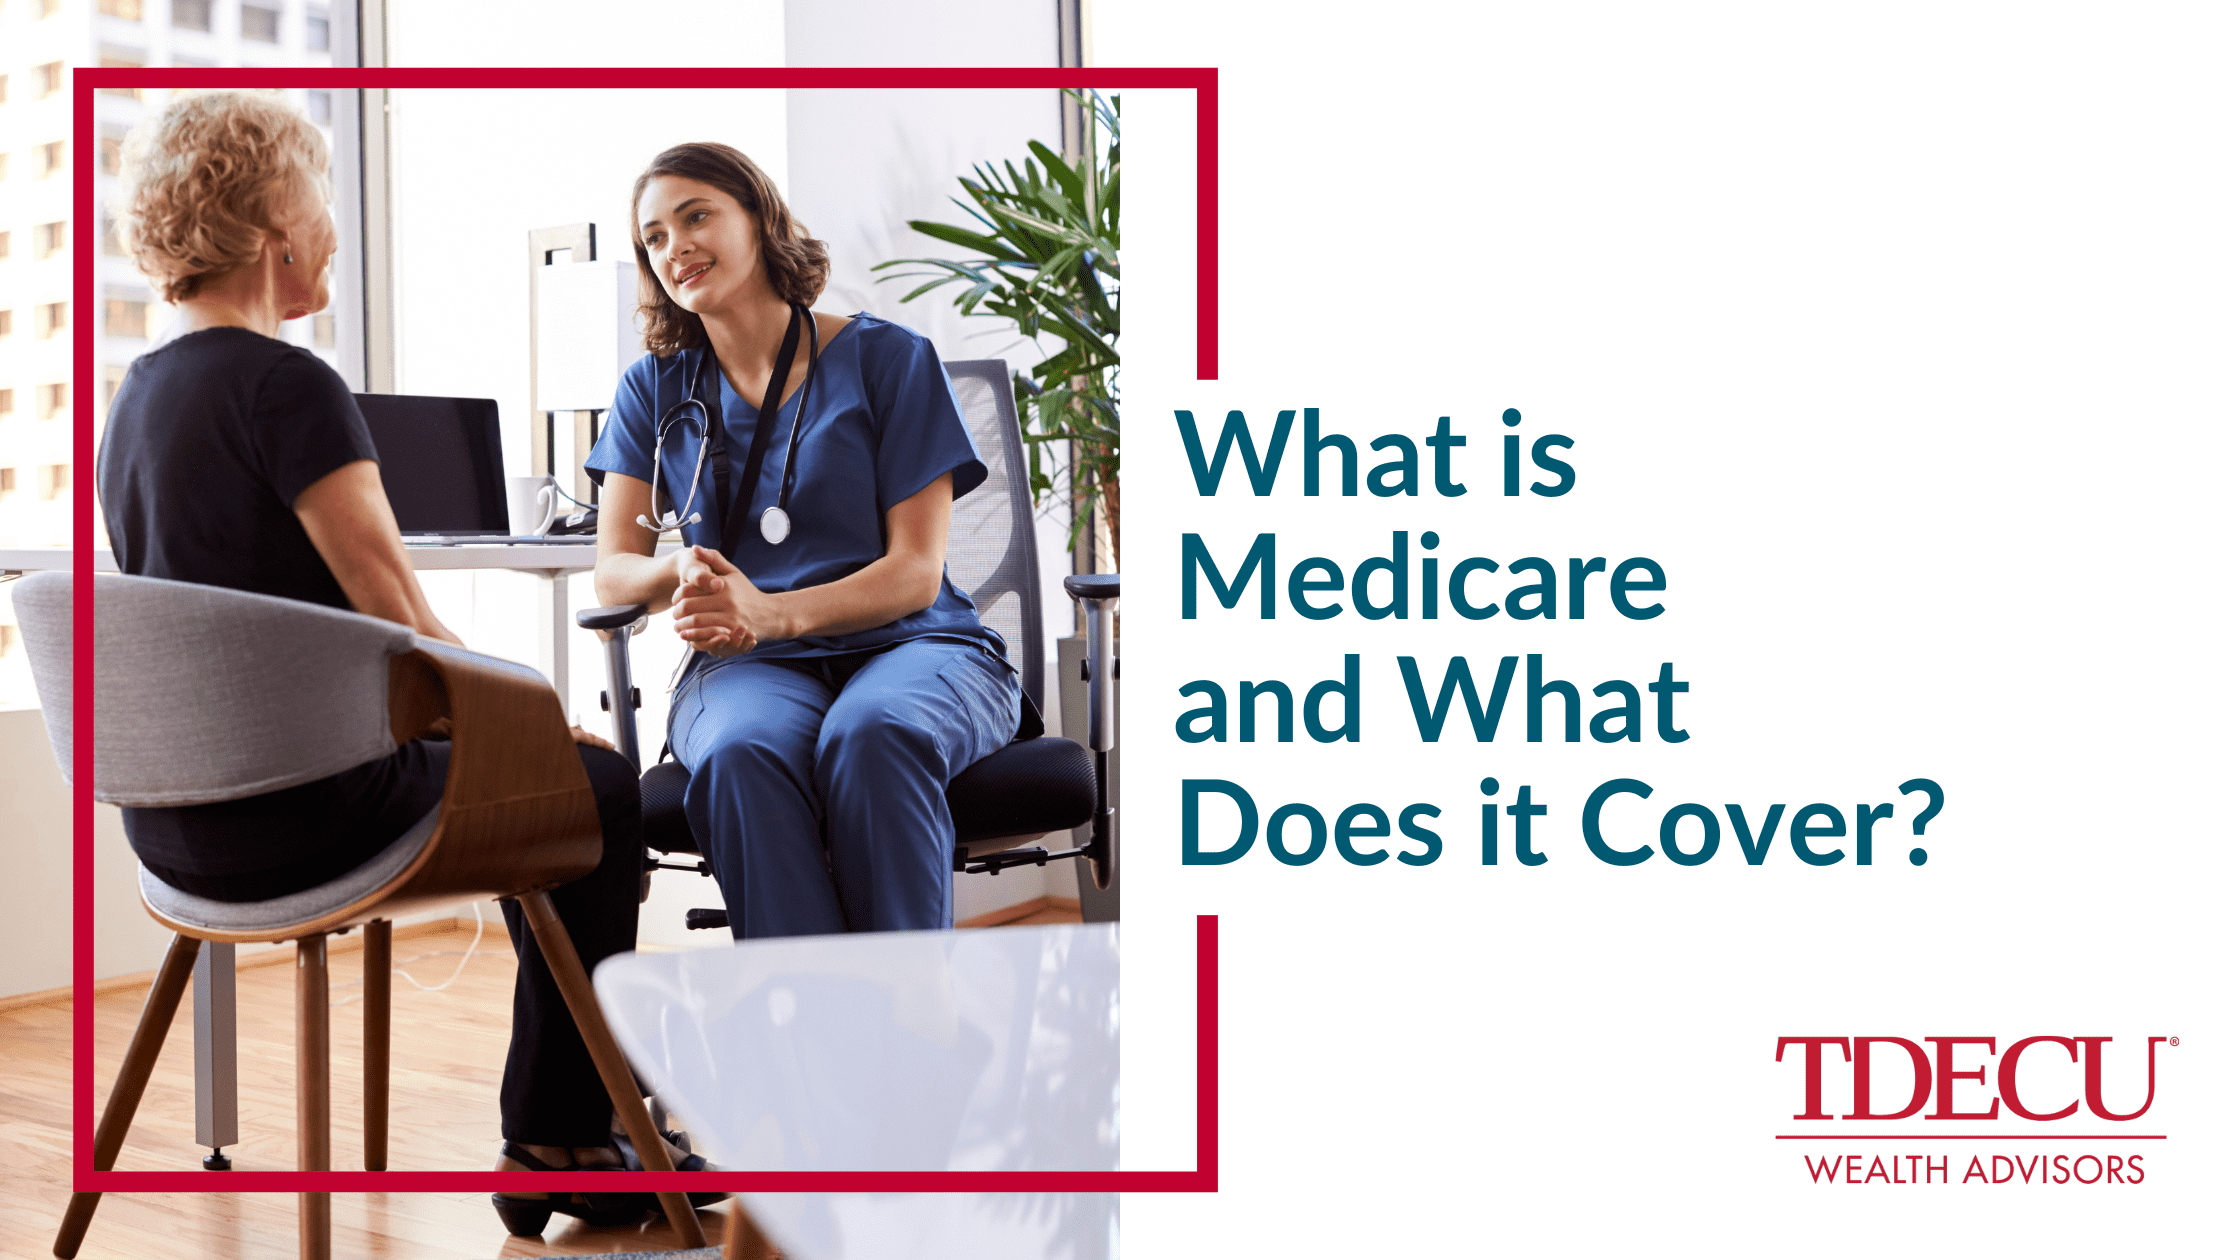 What is Medicare and What Does it Cover?